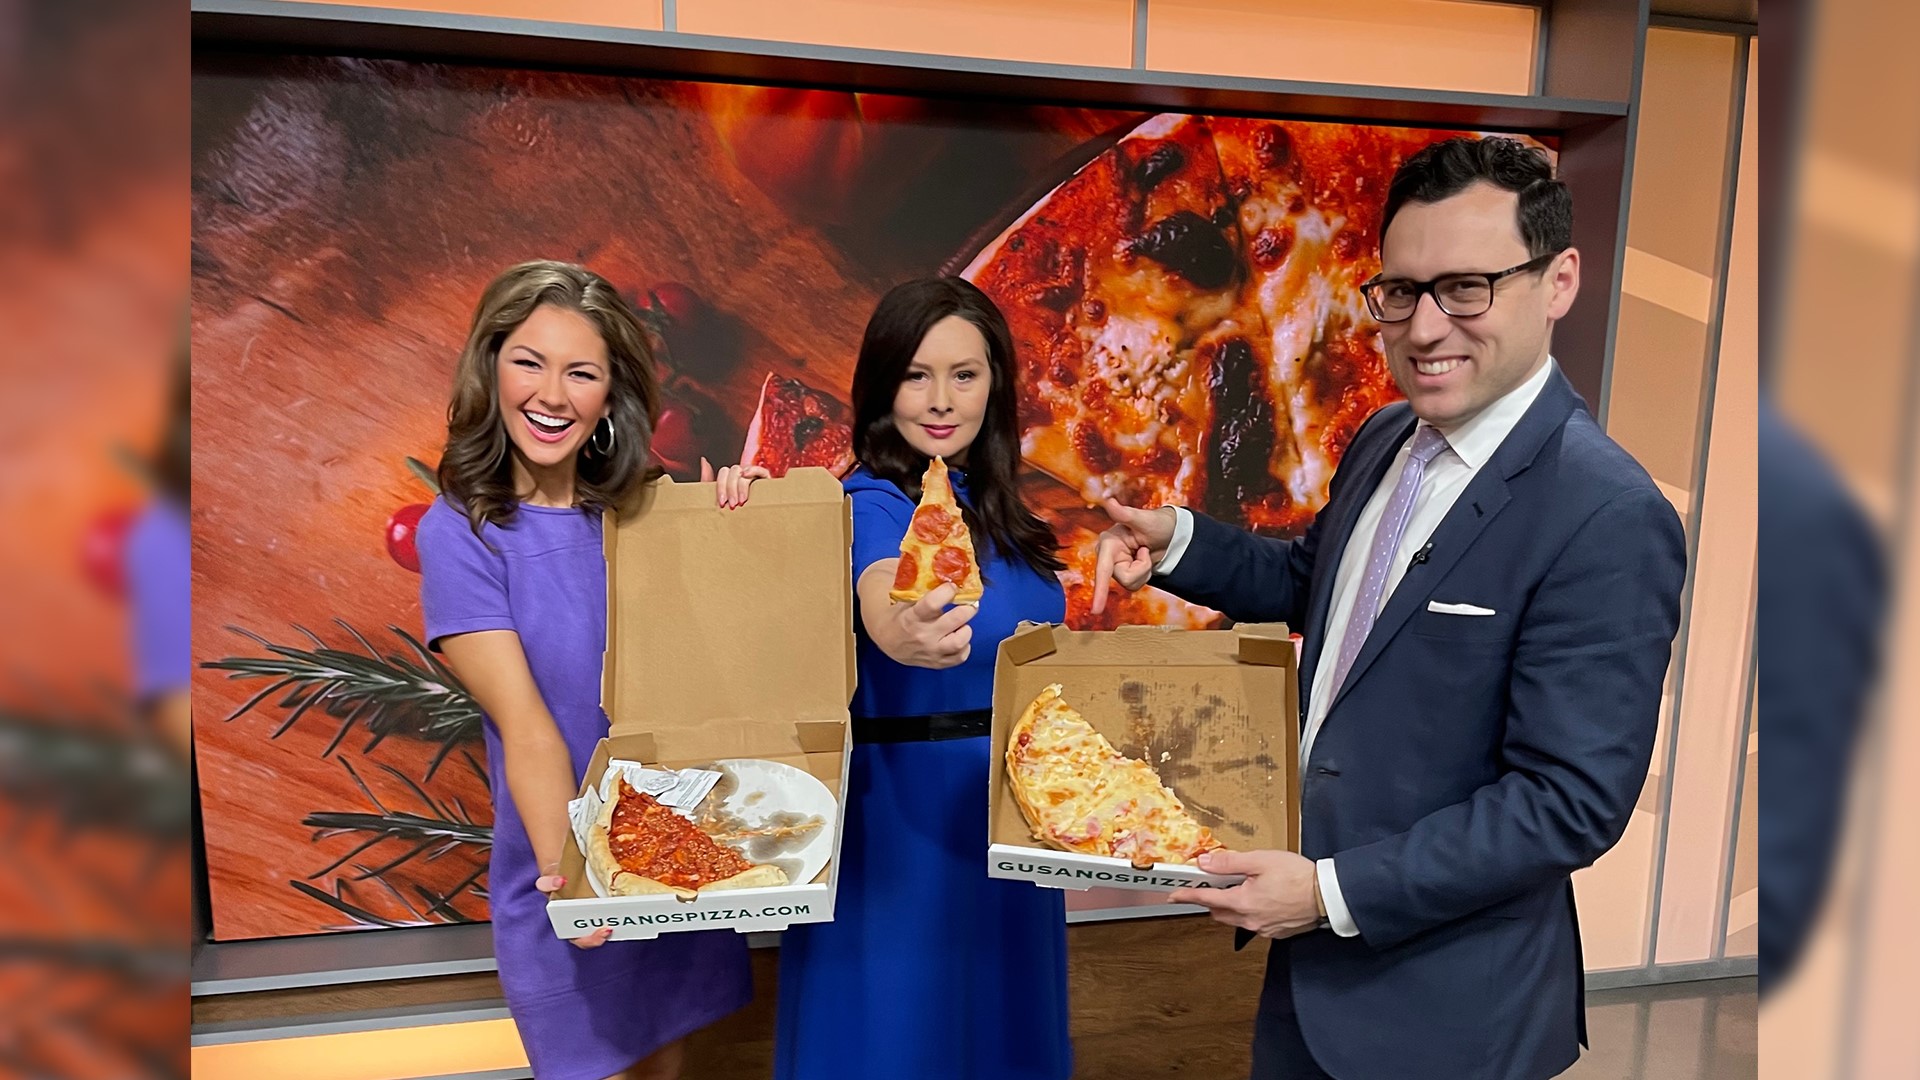 If you're wondering what to have for lunch or dinner today, there's a pretty obvious choice. Happy National Pizza Day!! 🍕🍕